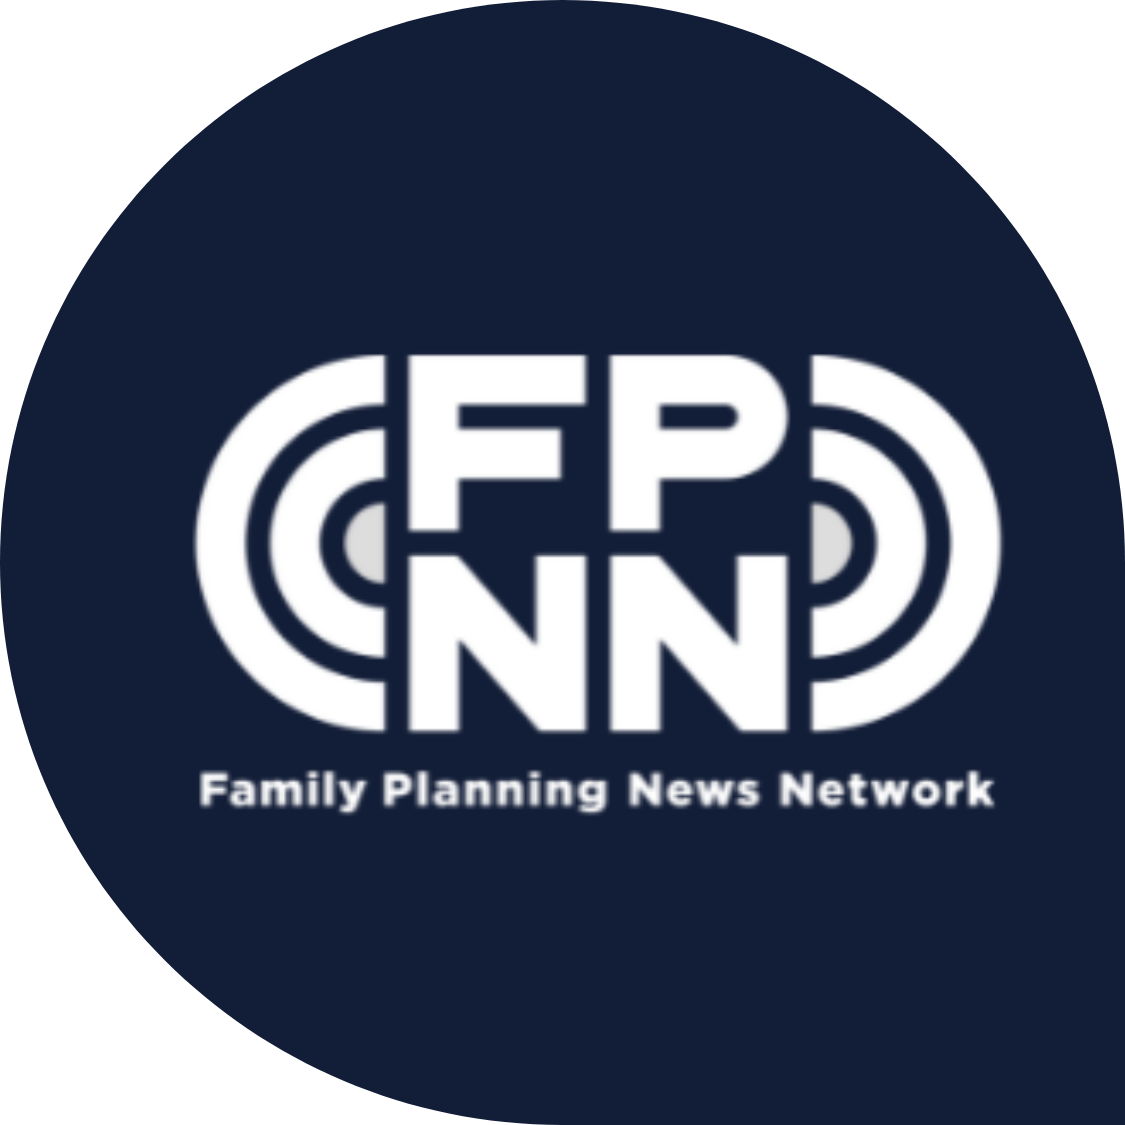 Family Planning News Network